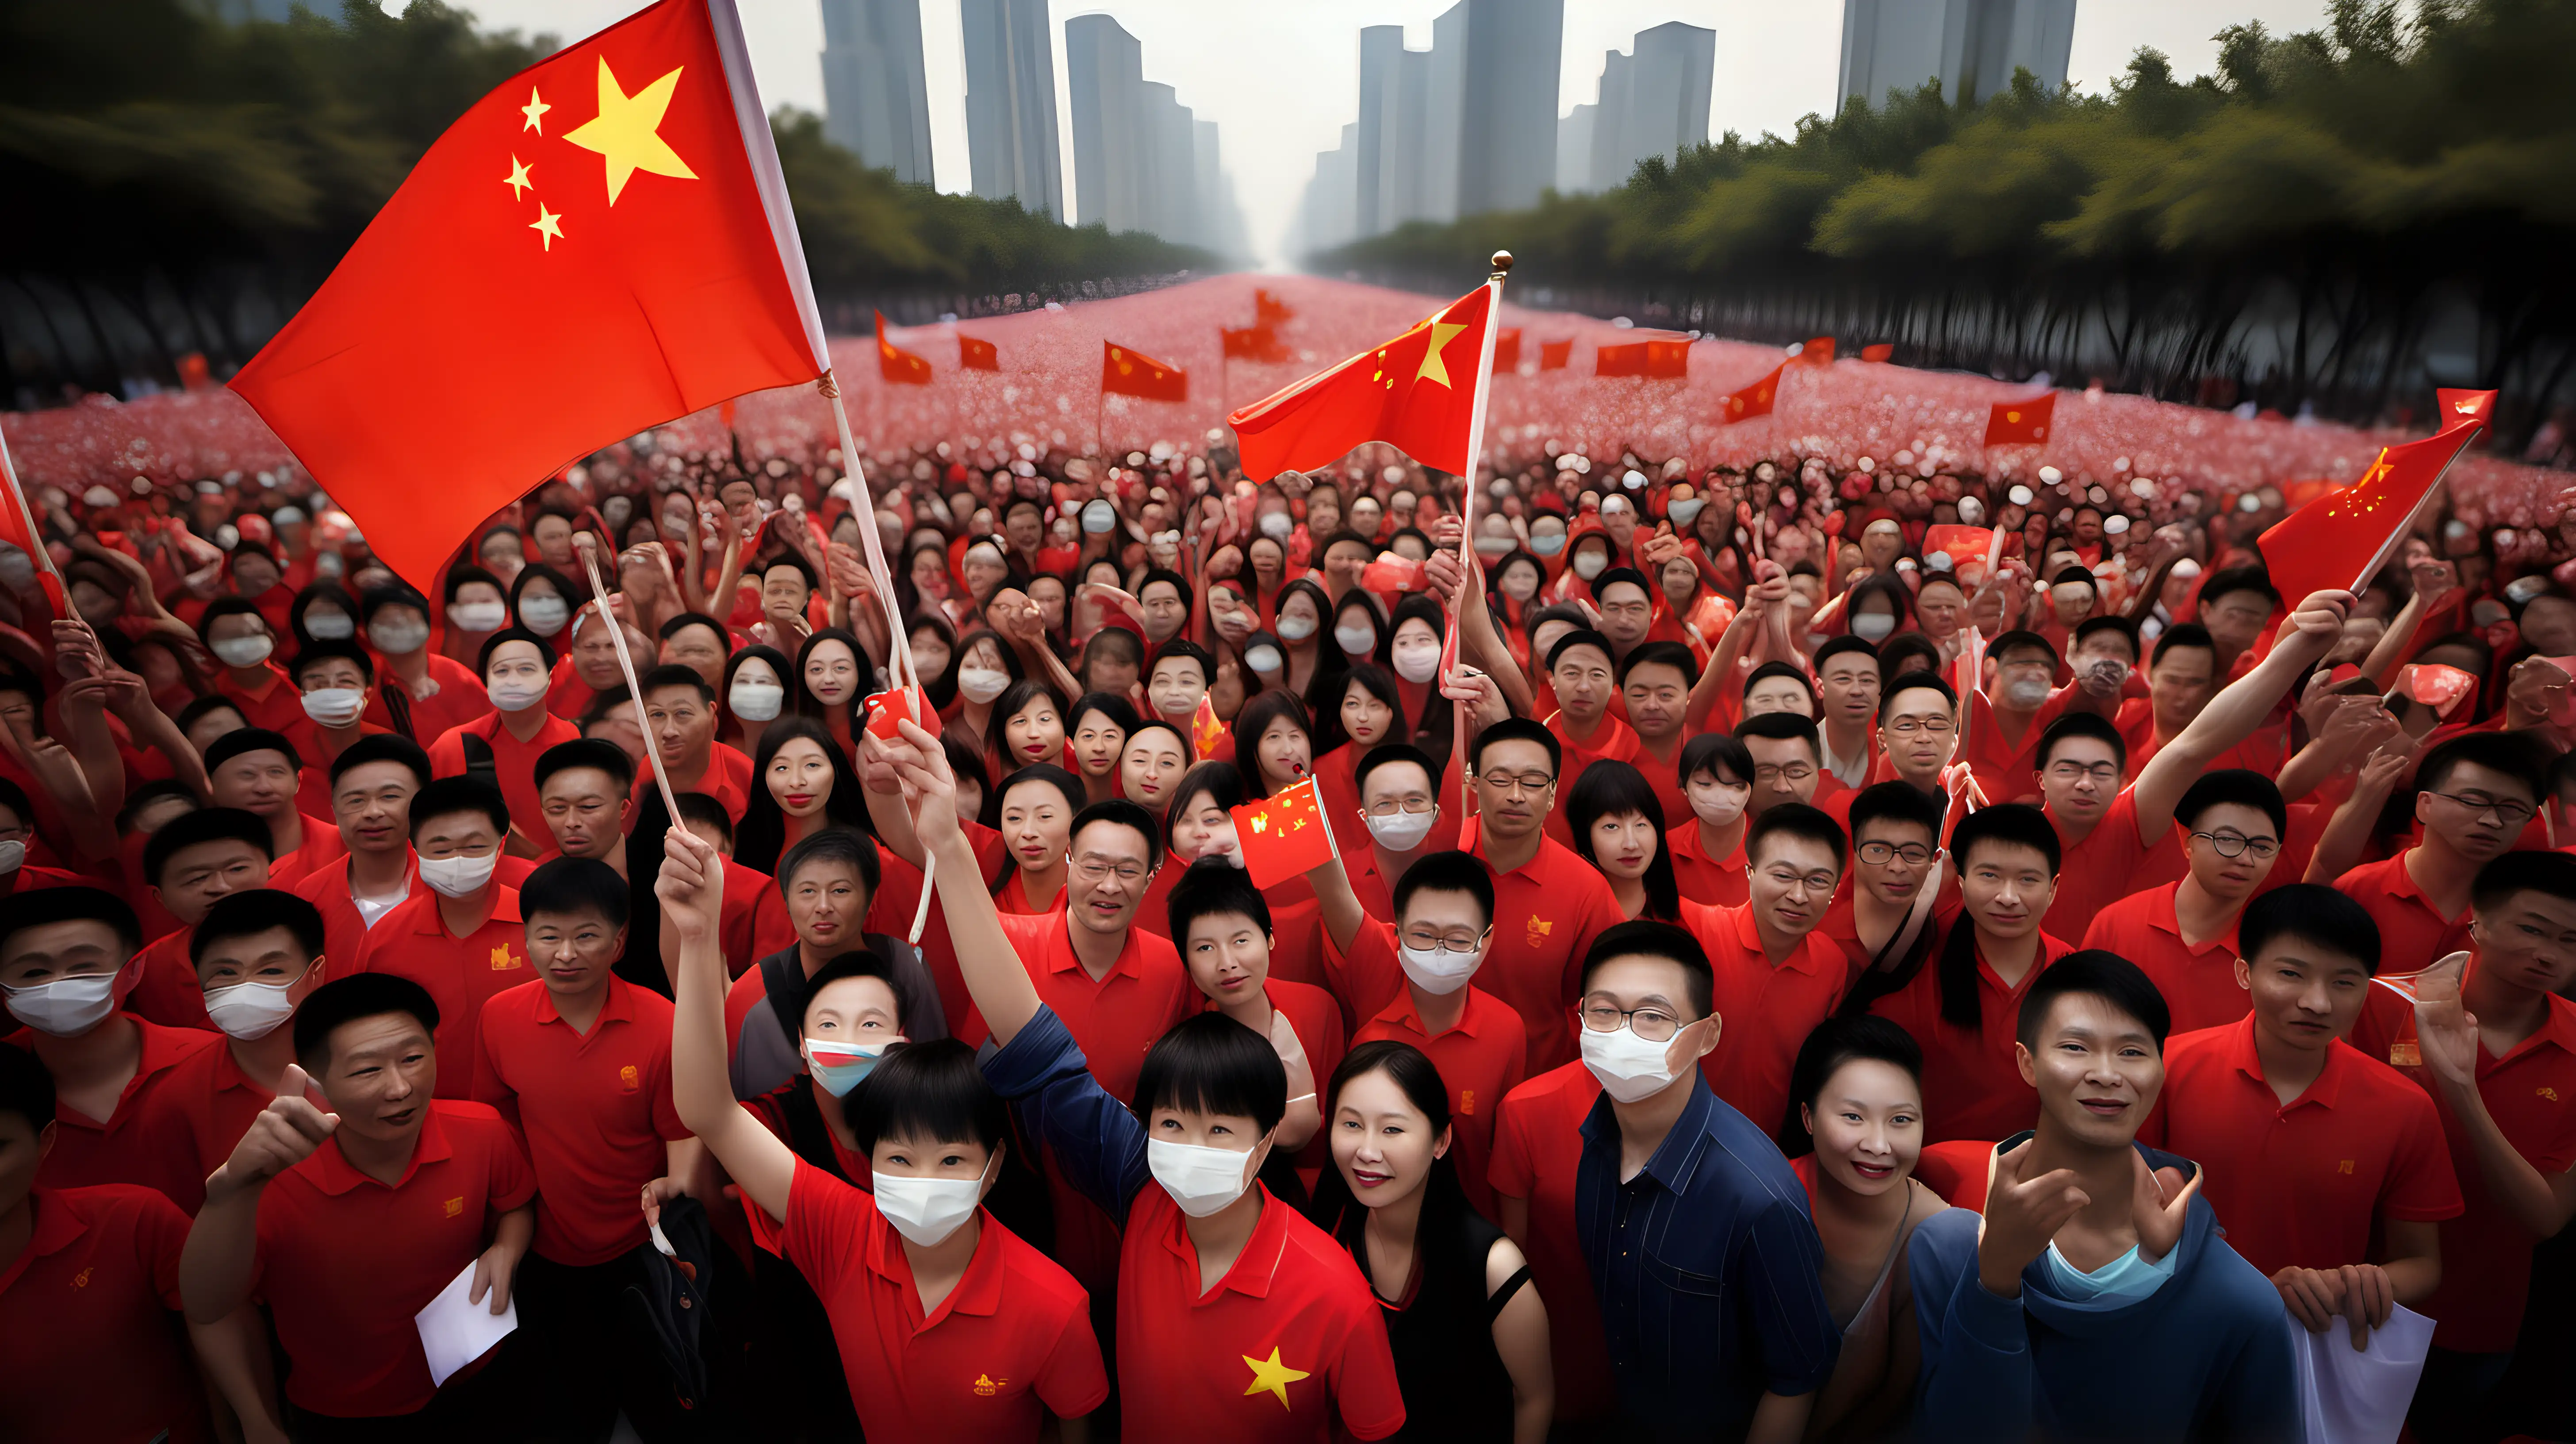 Showcase a person participating in a patriotic event, holding the Chinese flag aloft, surrounded by fellow citizens, expressing their shared love for the country.